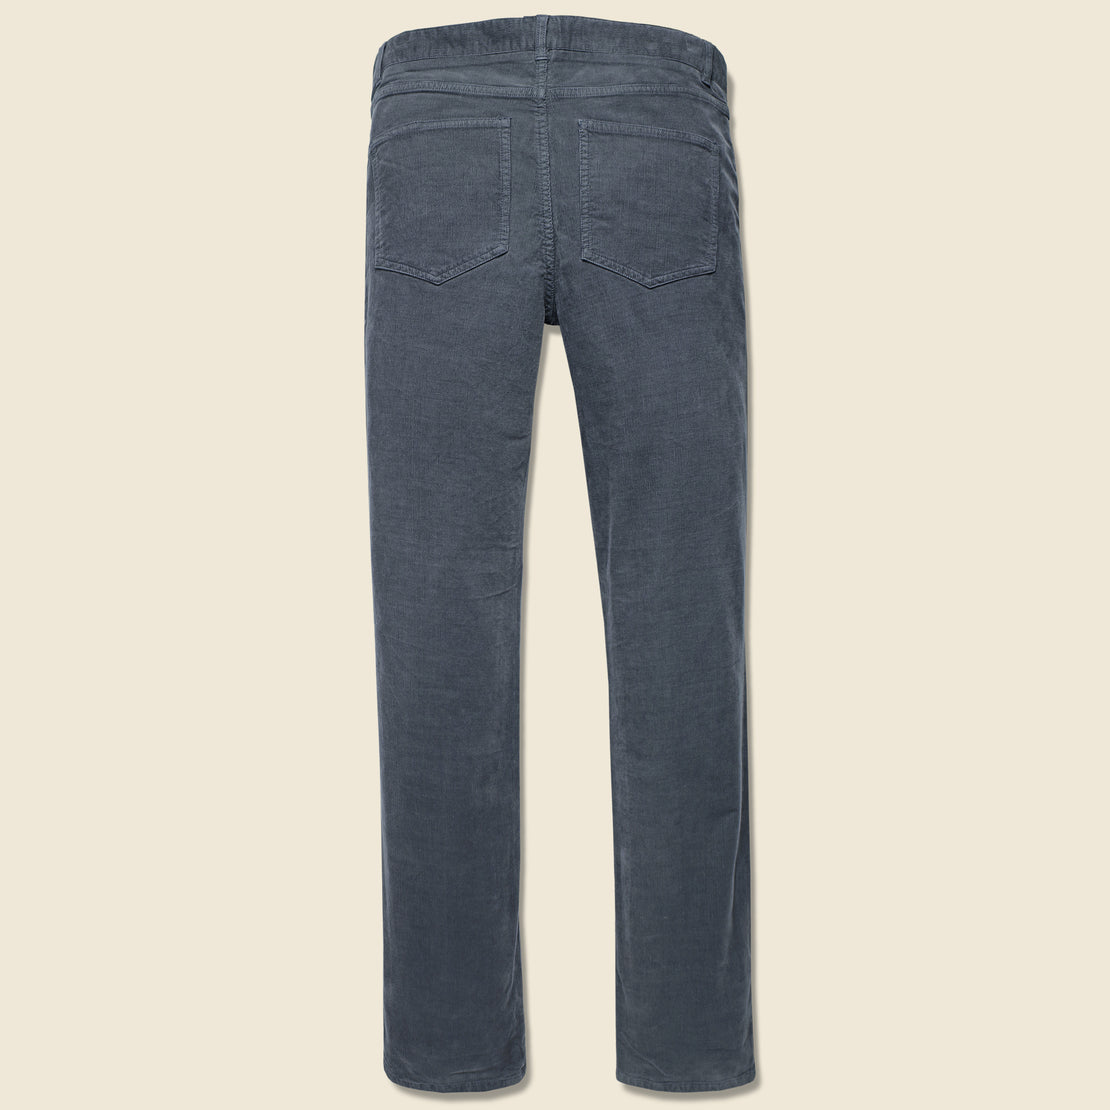 Stretch Corduroy Pant - Navy - Faherty - STAG Provisions - Pants - Corduroy